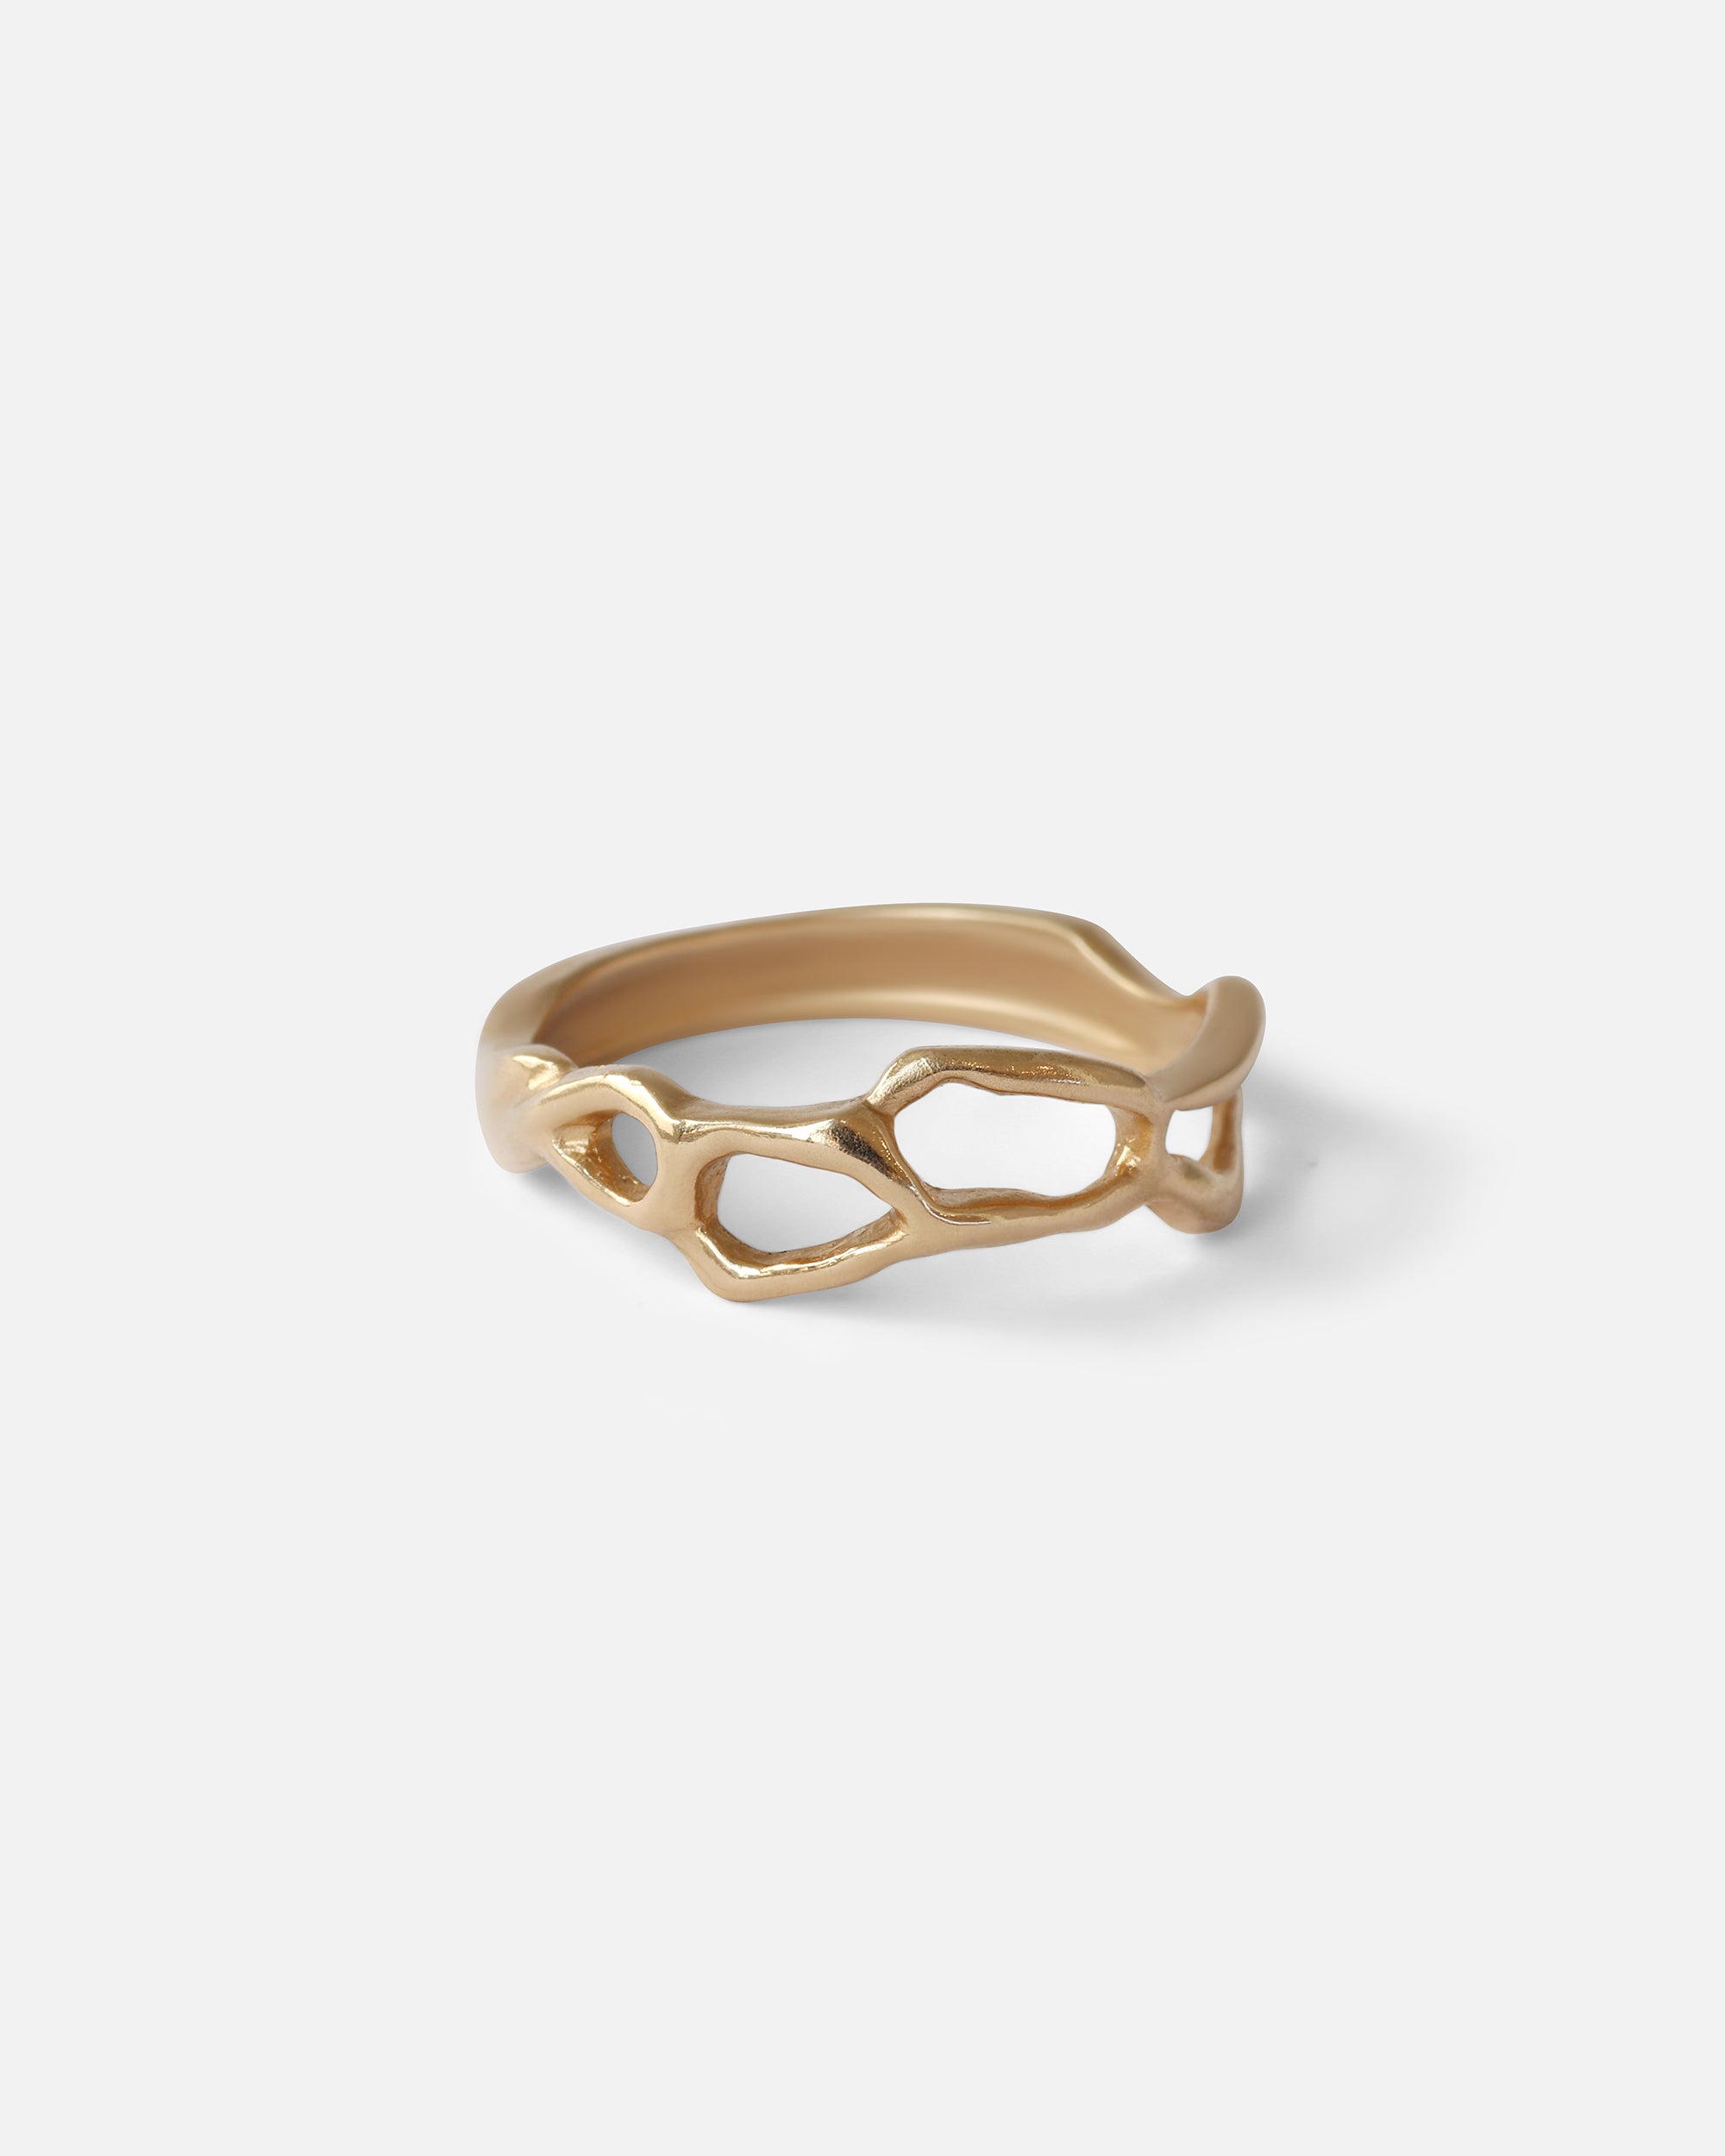 White Water Ring By Young Sun Song in rings Category